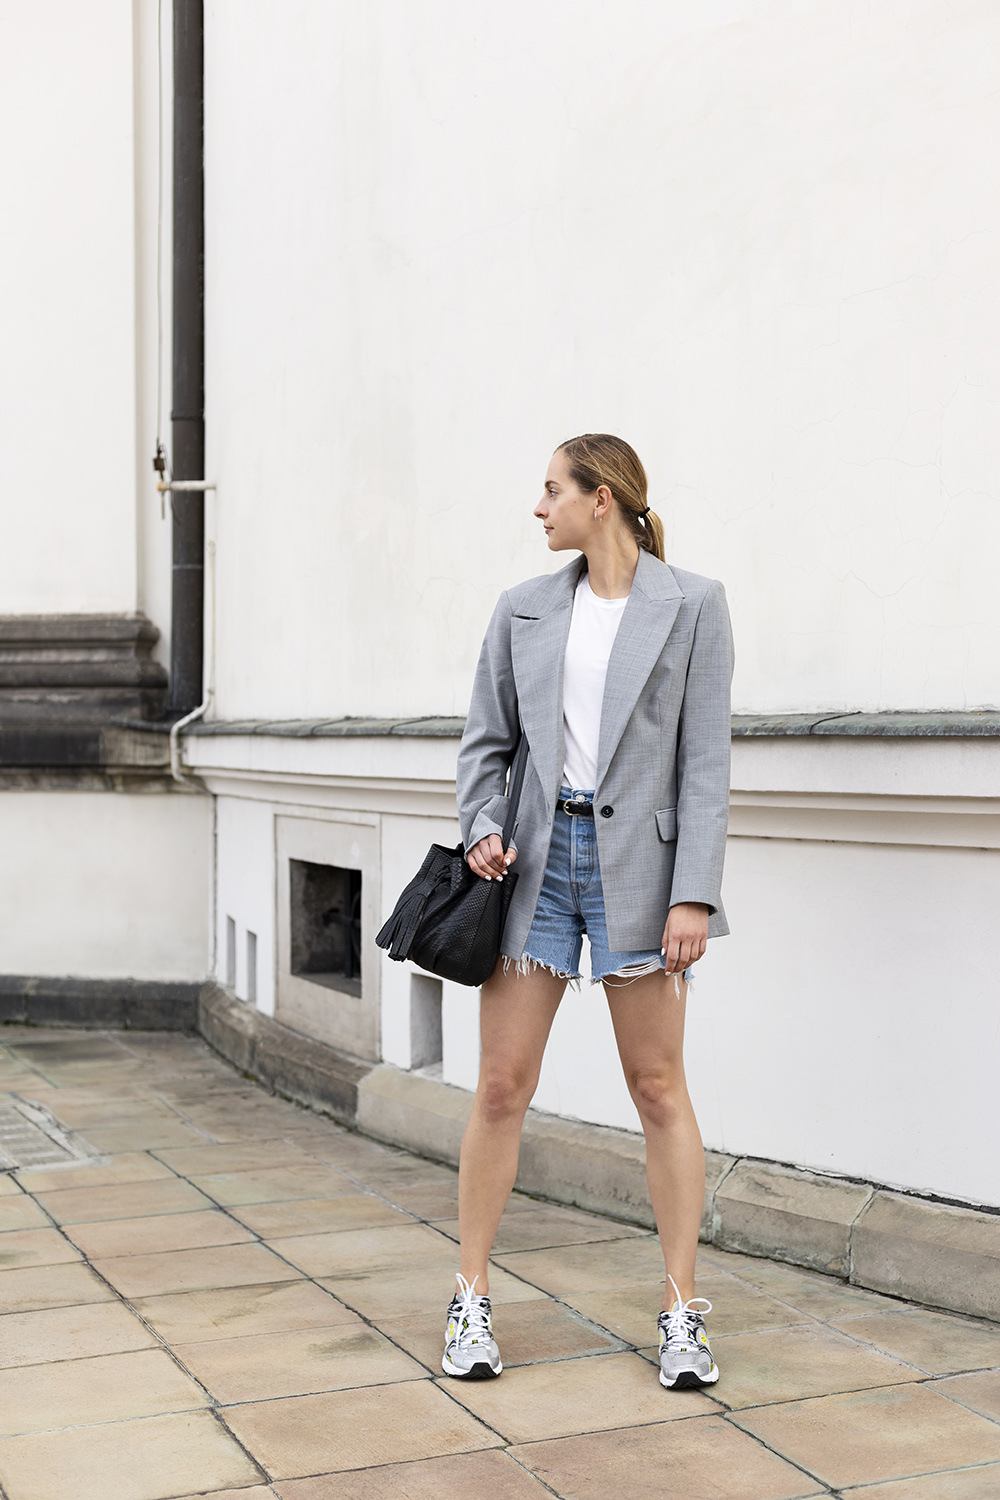 Blazer and sneakers. Athleisure outfit